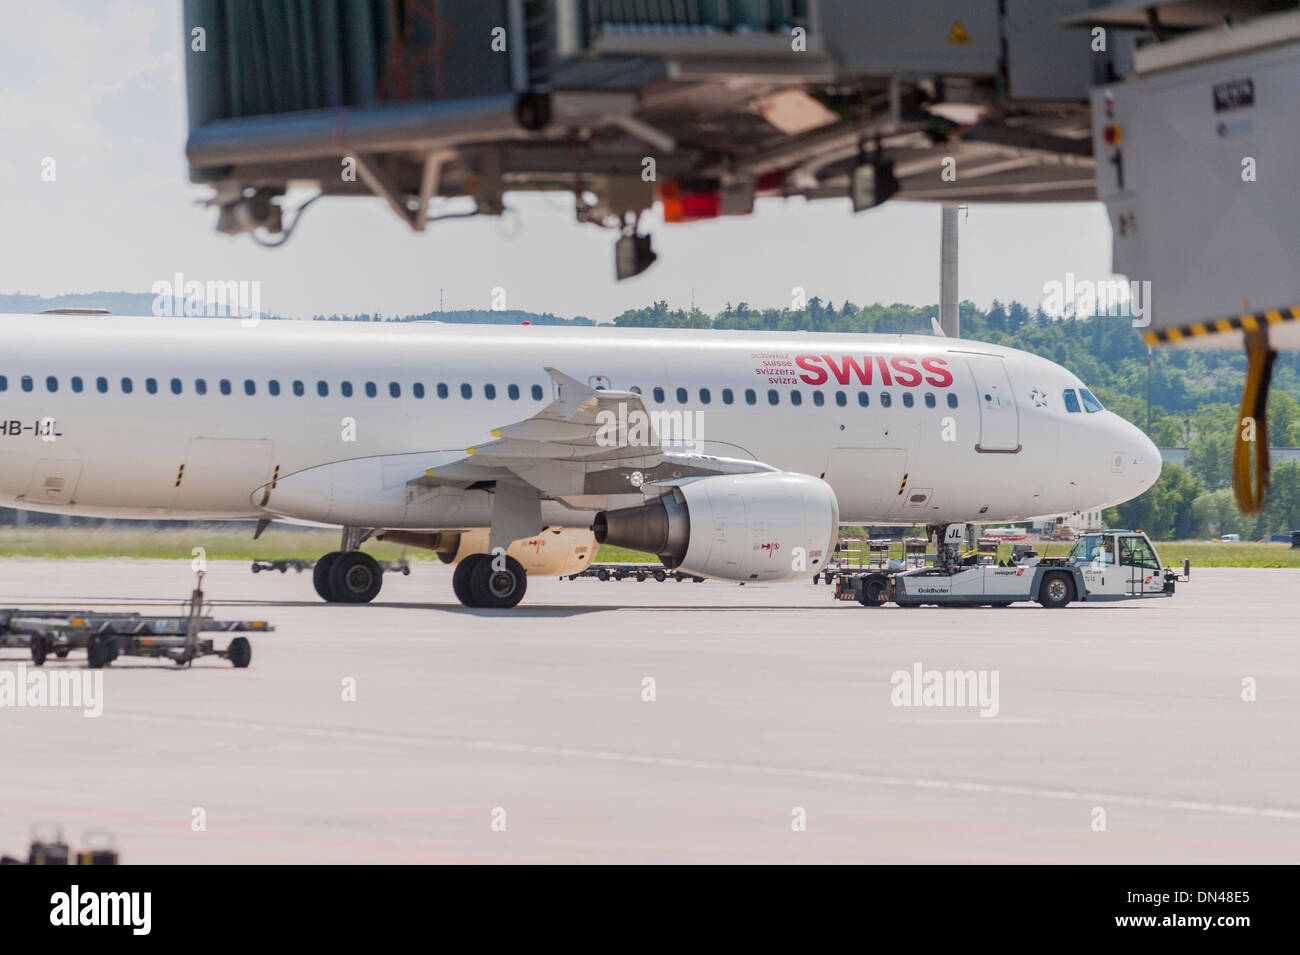 An Airbus aircraft of Swiss International Airlines is pulled to the runway at Zurich international airport Stock Photo